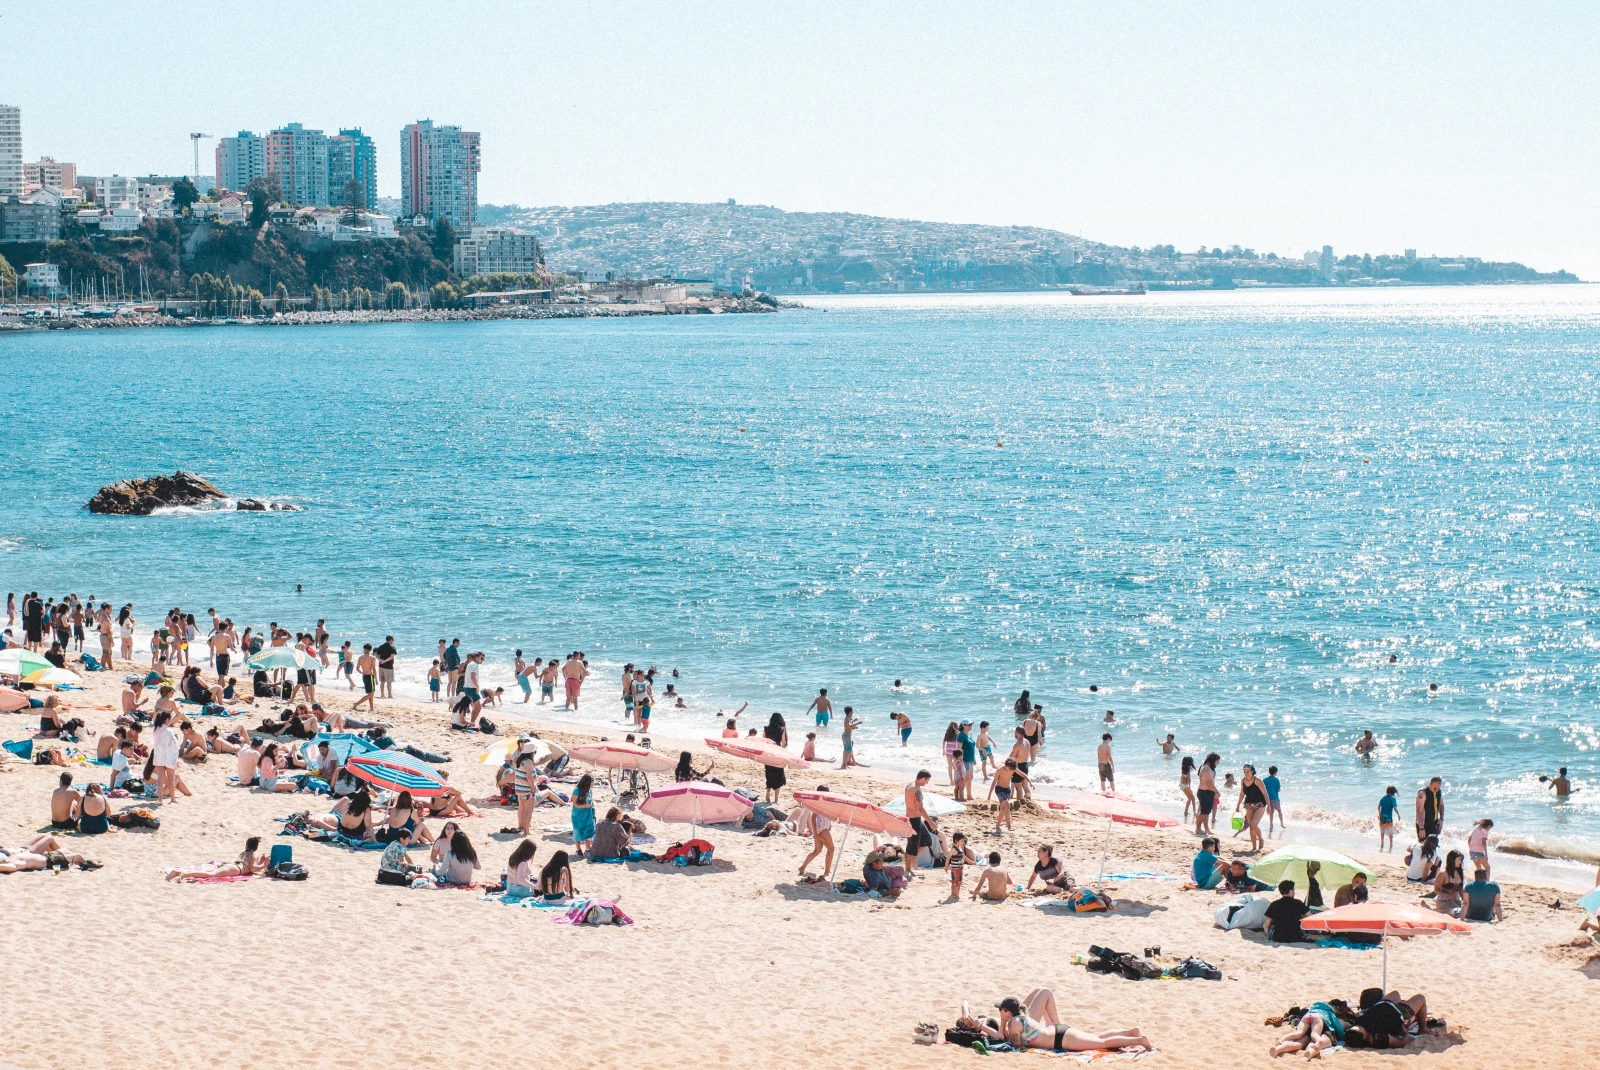 Body of water with people on the beach on sunny day during daytime